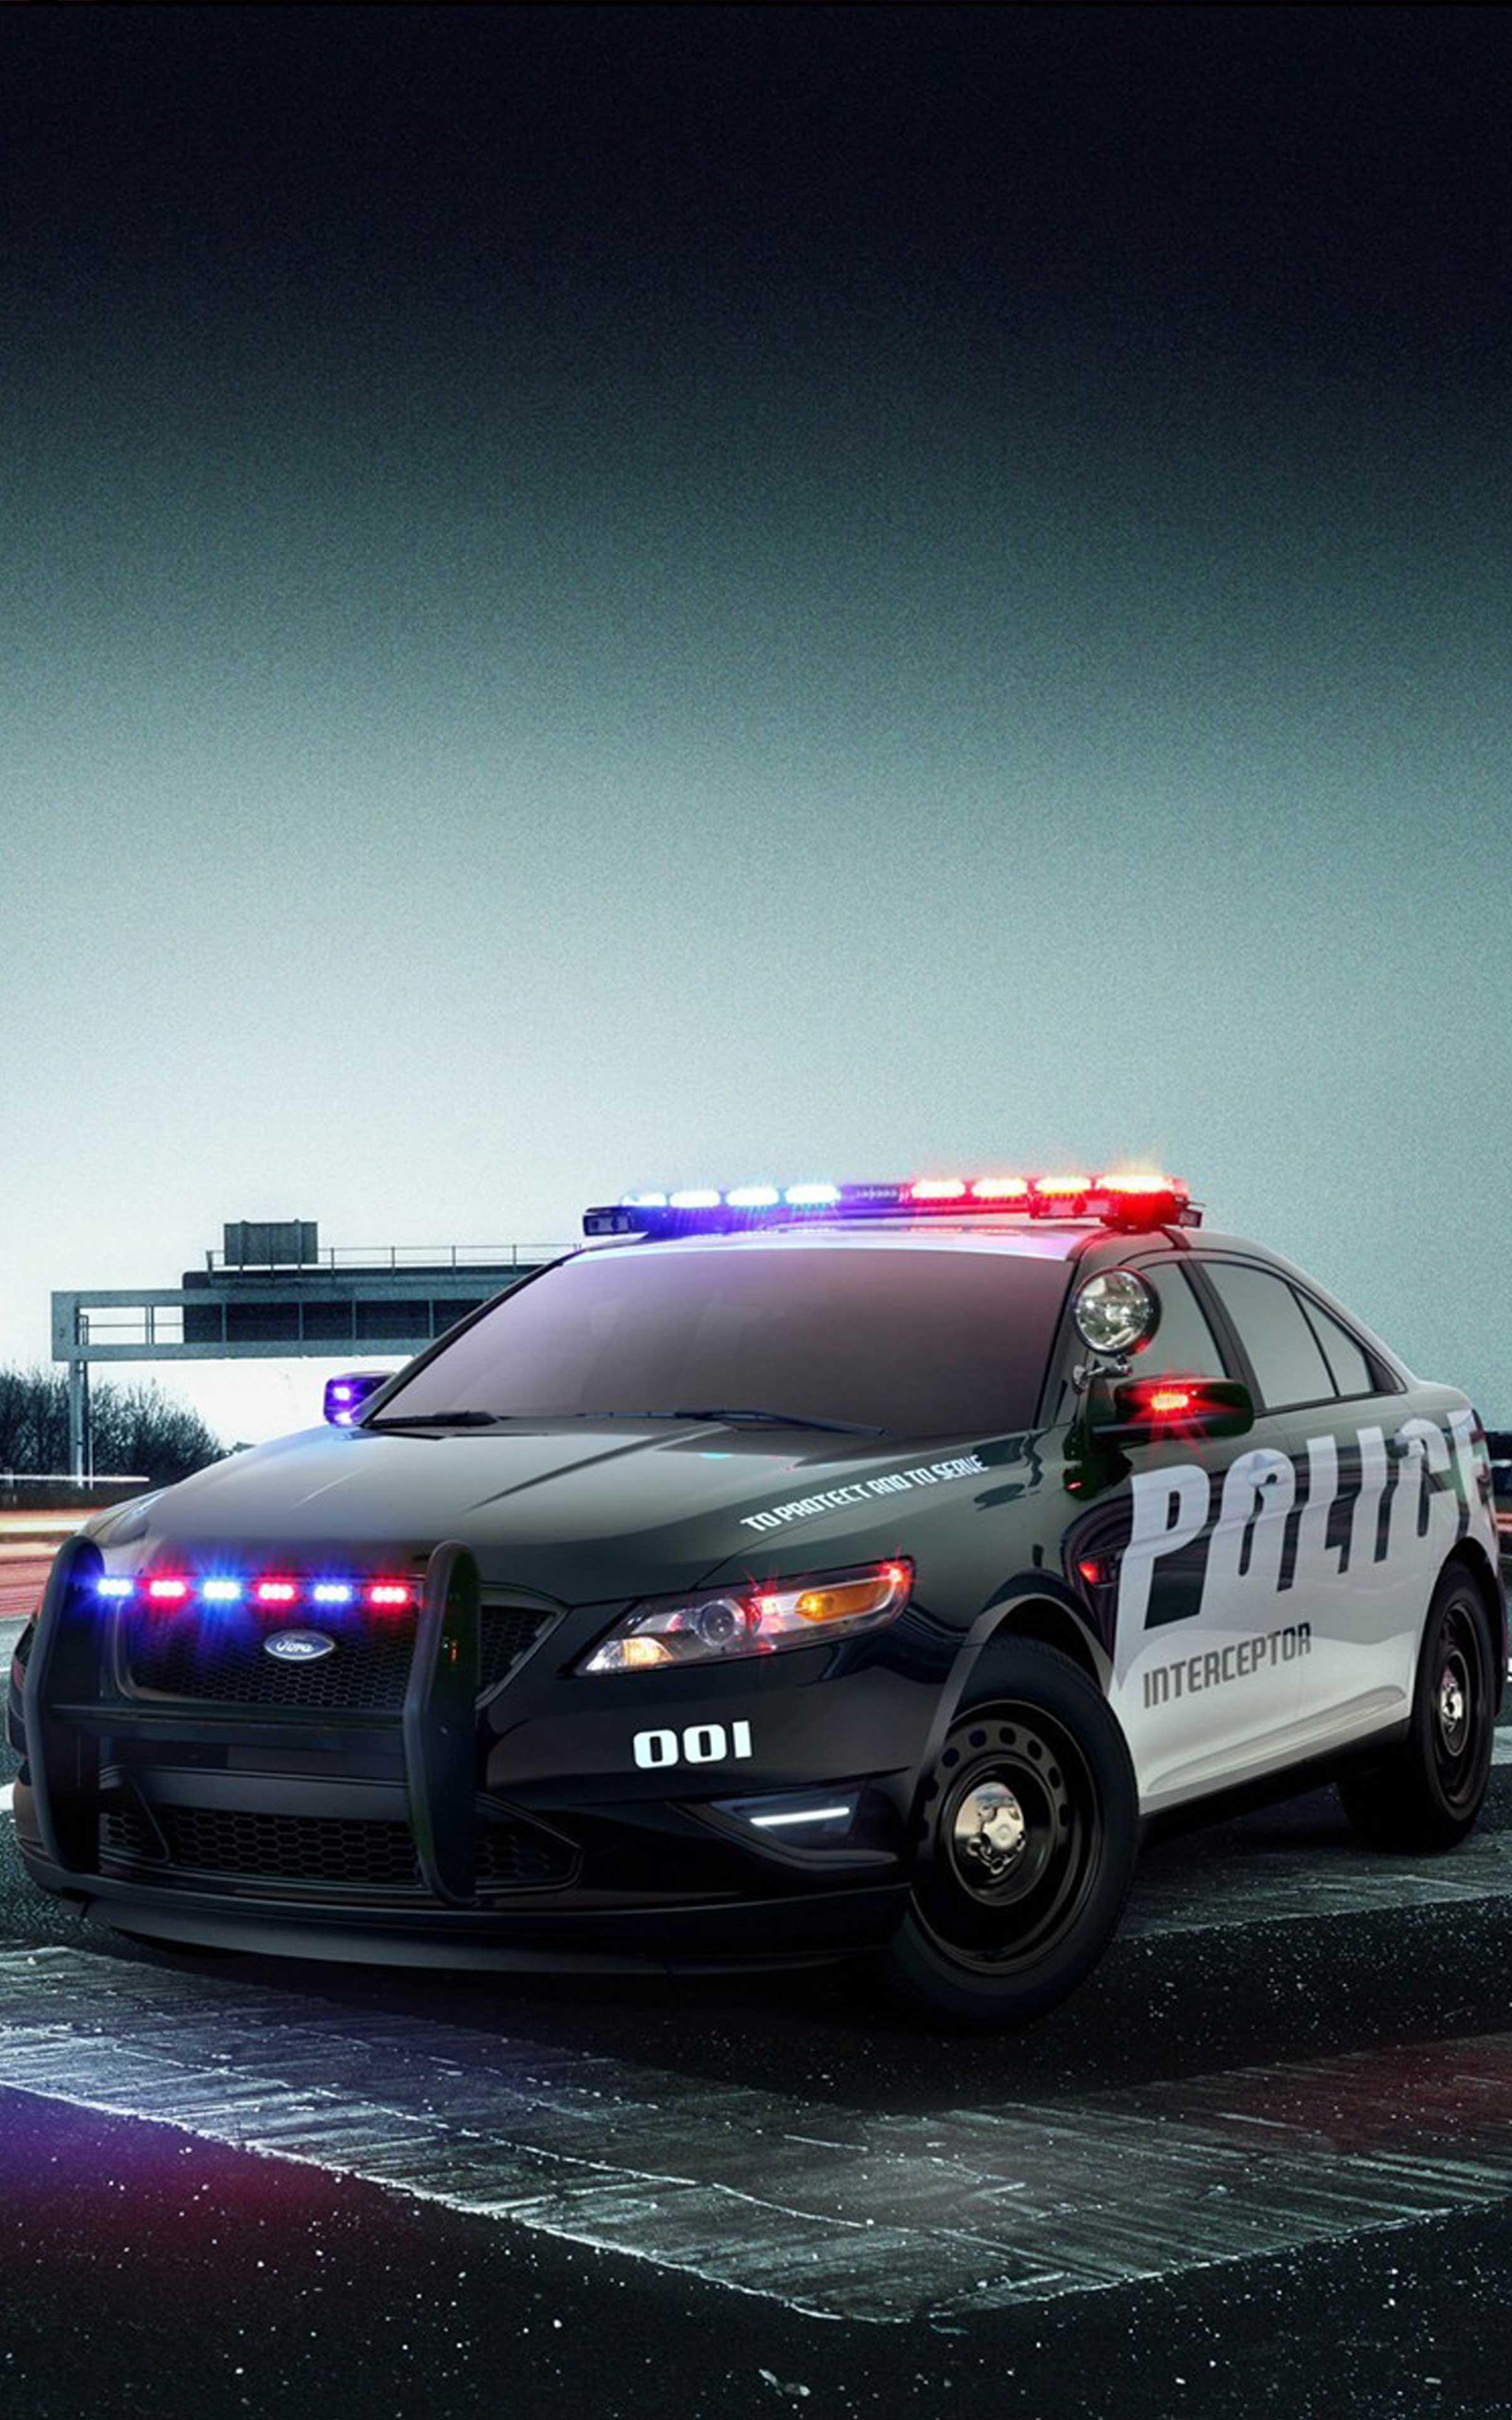 86 Get Police car cell phone wallpaper for Android Wallpaper